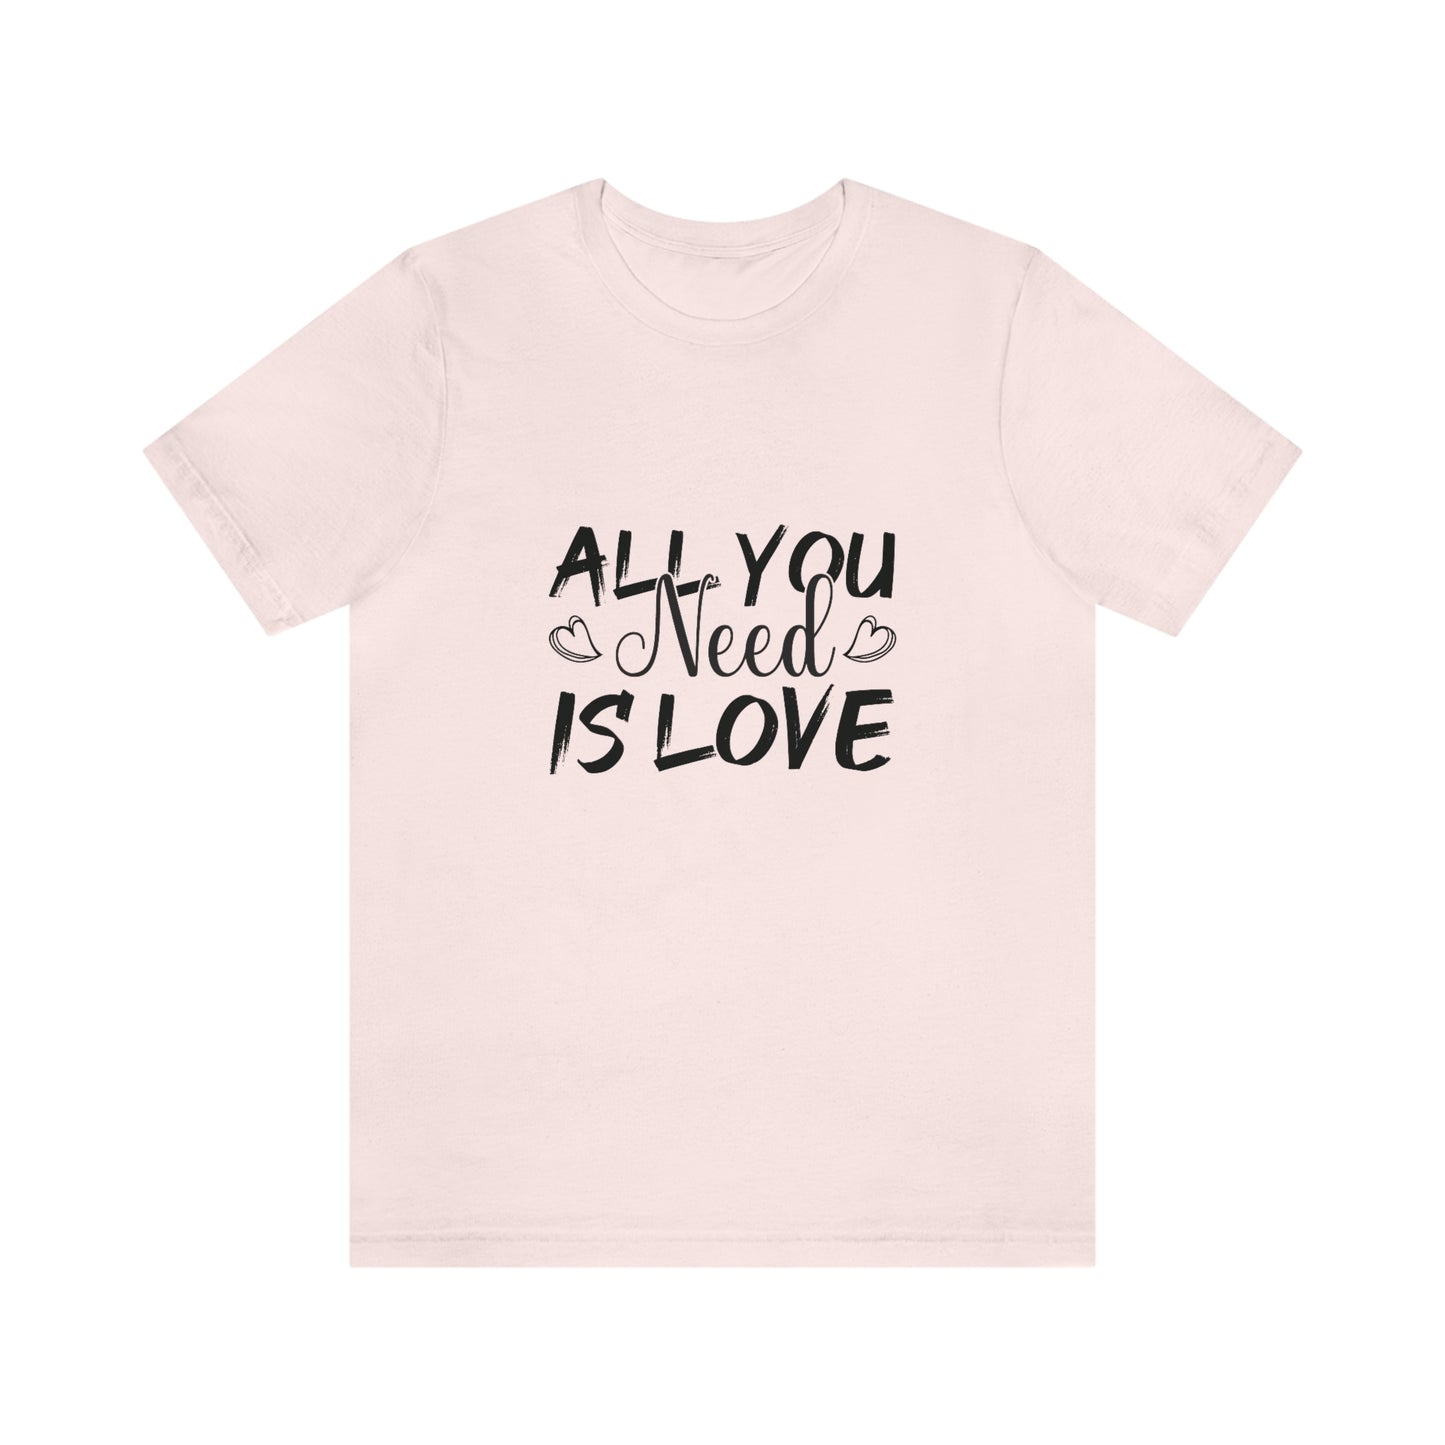 All You Need is Love Women's T-shirts